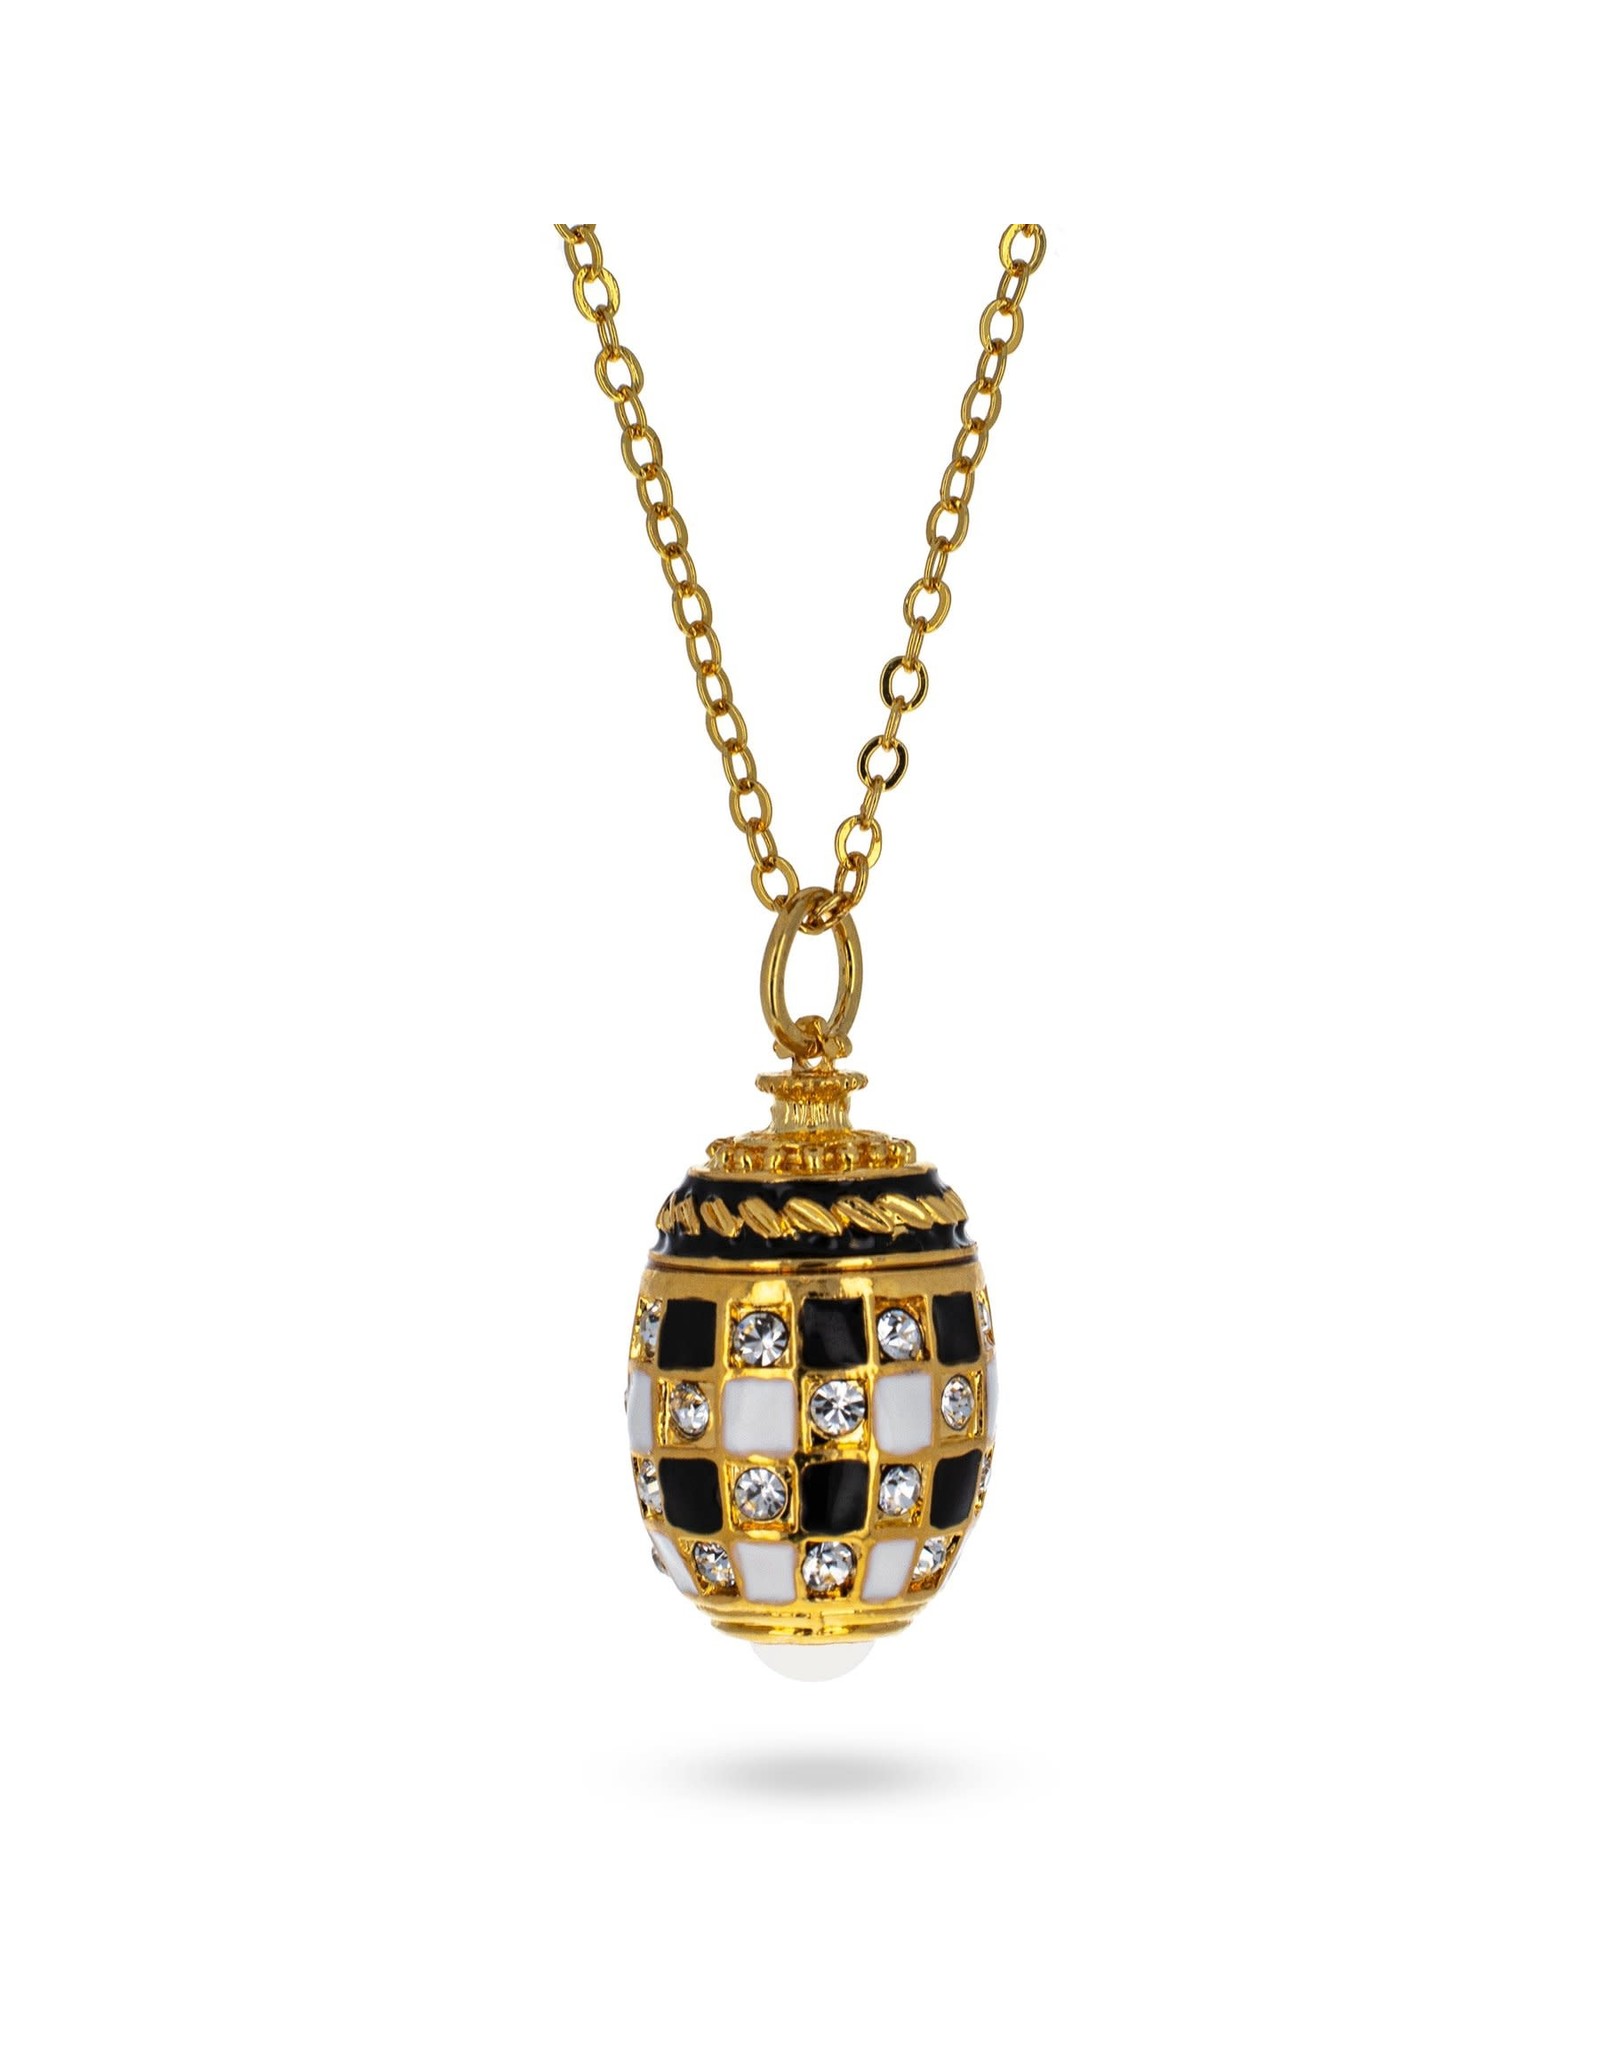 Imperial Egg Pendant "Royal Chess" Necklace